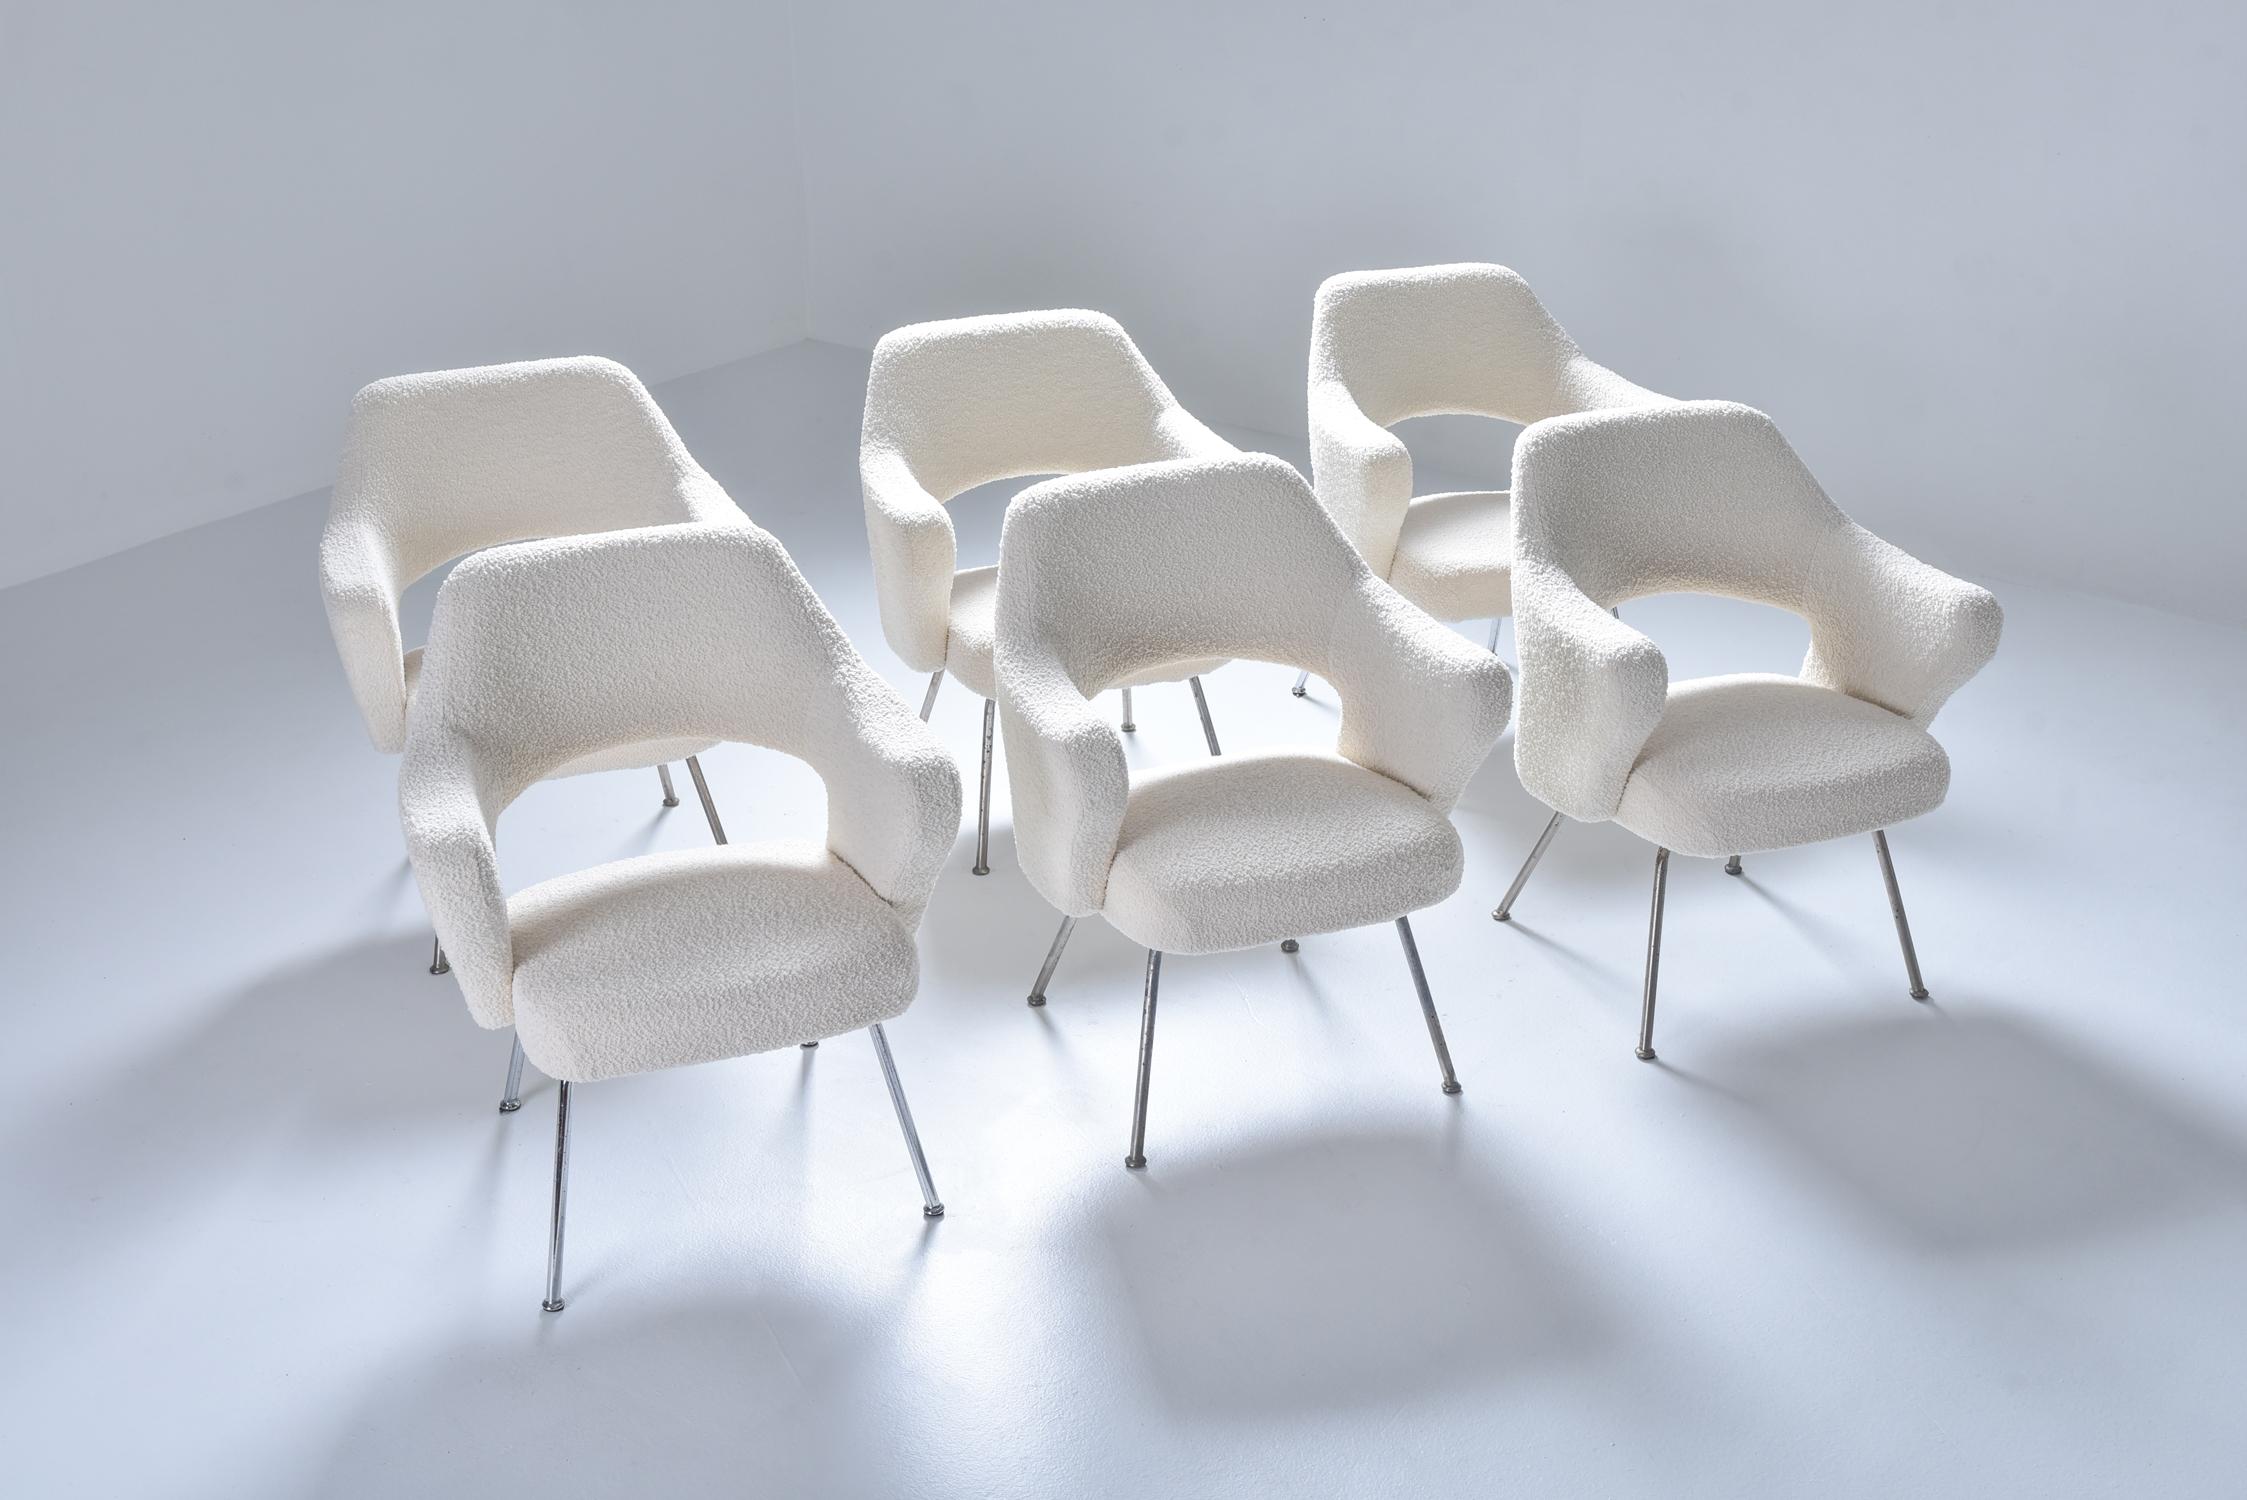 Rare set of six armchairs, P16, design Gastone Rinaldi, Rima Padova 1950.

Early Postmodern Italian design armchairs by Gastone Rinaldi
His 1950s design pieces are very rare and quite sought after.
Newly upholstered in white bouclé wool.
We